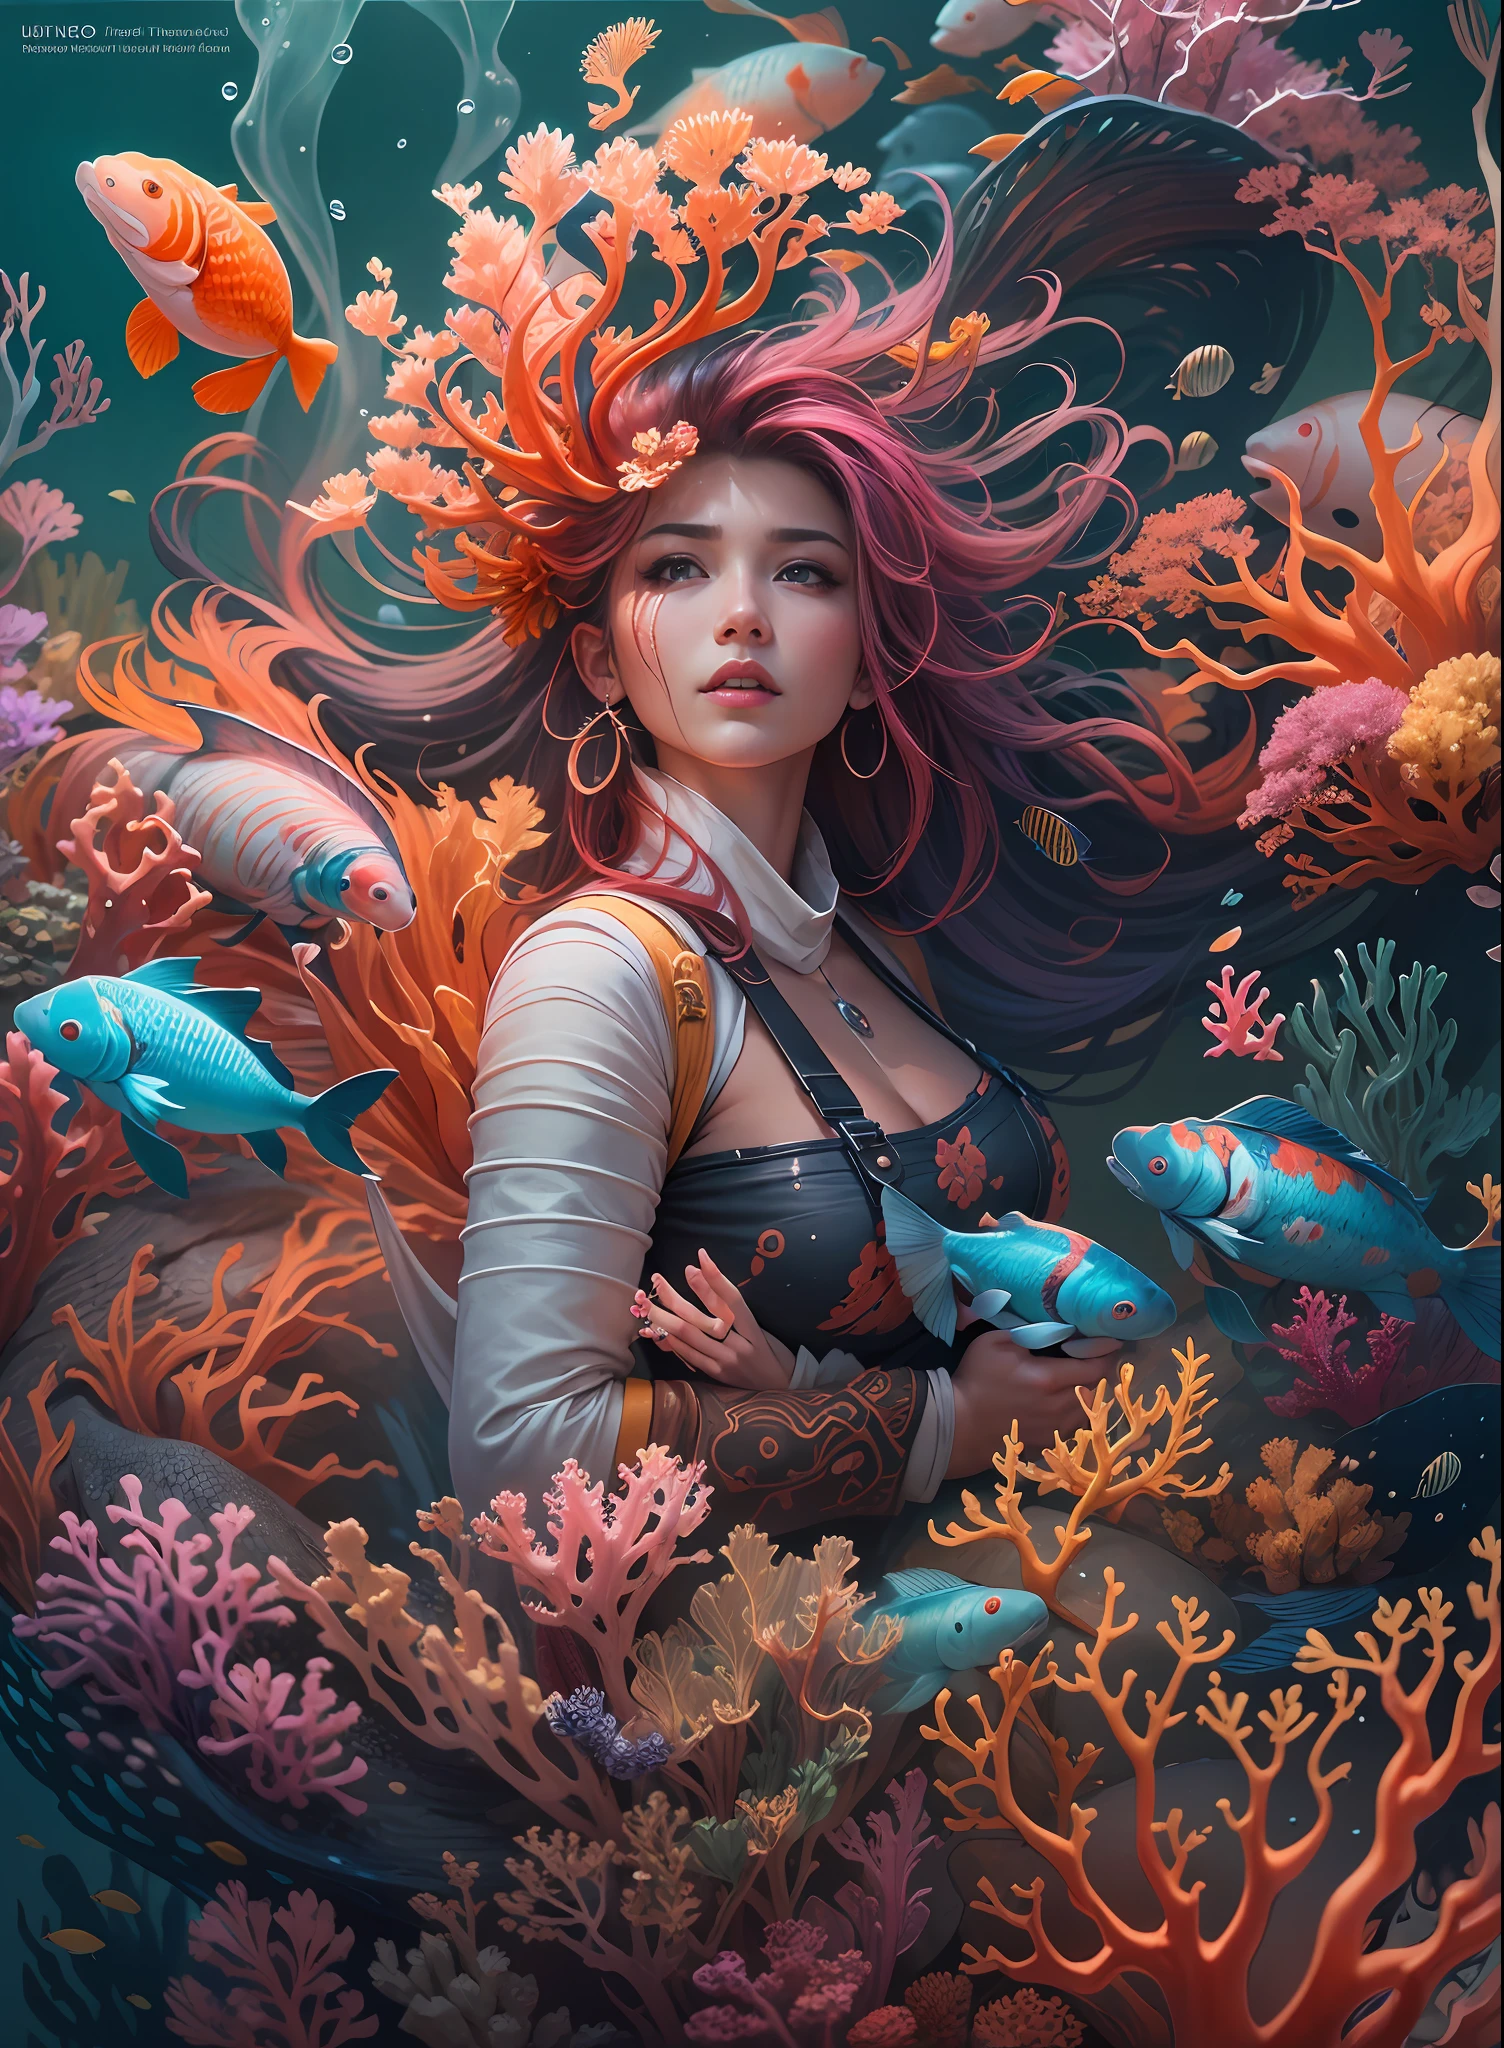 model shoot tyle, (highly detailed CG unit 8k wallpaper), A chaotic storm of complex liquid smoke in your head, Stylized abstract portrait of a beautiful girl, wetted skin,Koi，Carp Festival | | |，Koi Band,carp，Odd-shaped coral，ocean floor，Beautiful coral reef in the background，boulders,Marine life，colorful coral reef,Decorating the reef,Authors：Petros Afshar, Tran Ross, Whale Tom, Pedro Mohrbacher, Germ from art, Broken glass, ((Cheerful underwater landscape)) The octane number rendering of synchrotron radiation is very detailed, inspired by Yanjun Cheng, beautiful digital art, Art in the Gviz style, Highly detailed digital art in 8K, beautiful digital illustrations, Beautiful detailed digital art, stunning digital illustration, a beautiful artwork illustration, Exquisite digital illustration,8K Detailed Digital Art,